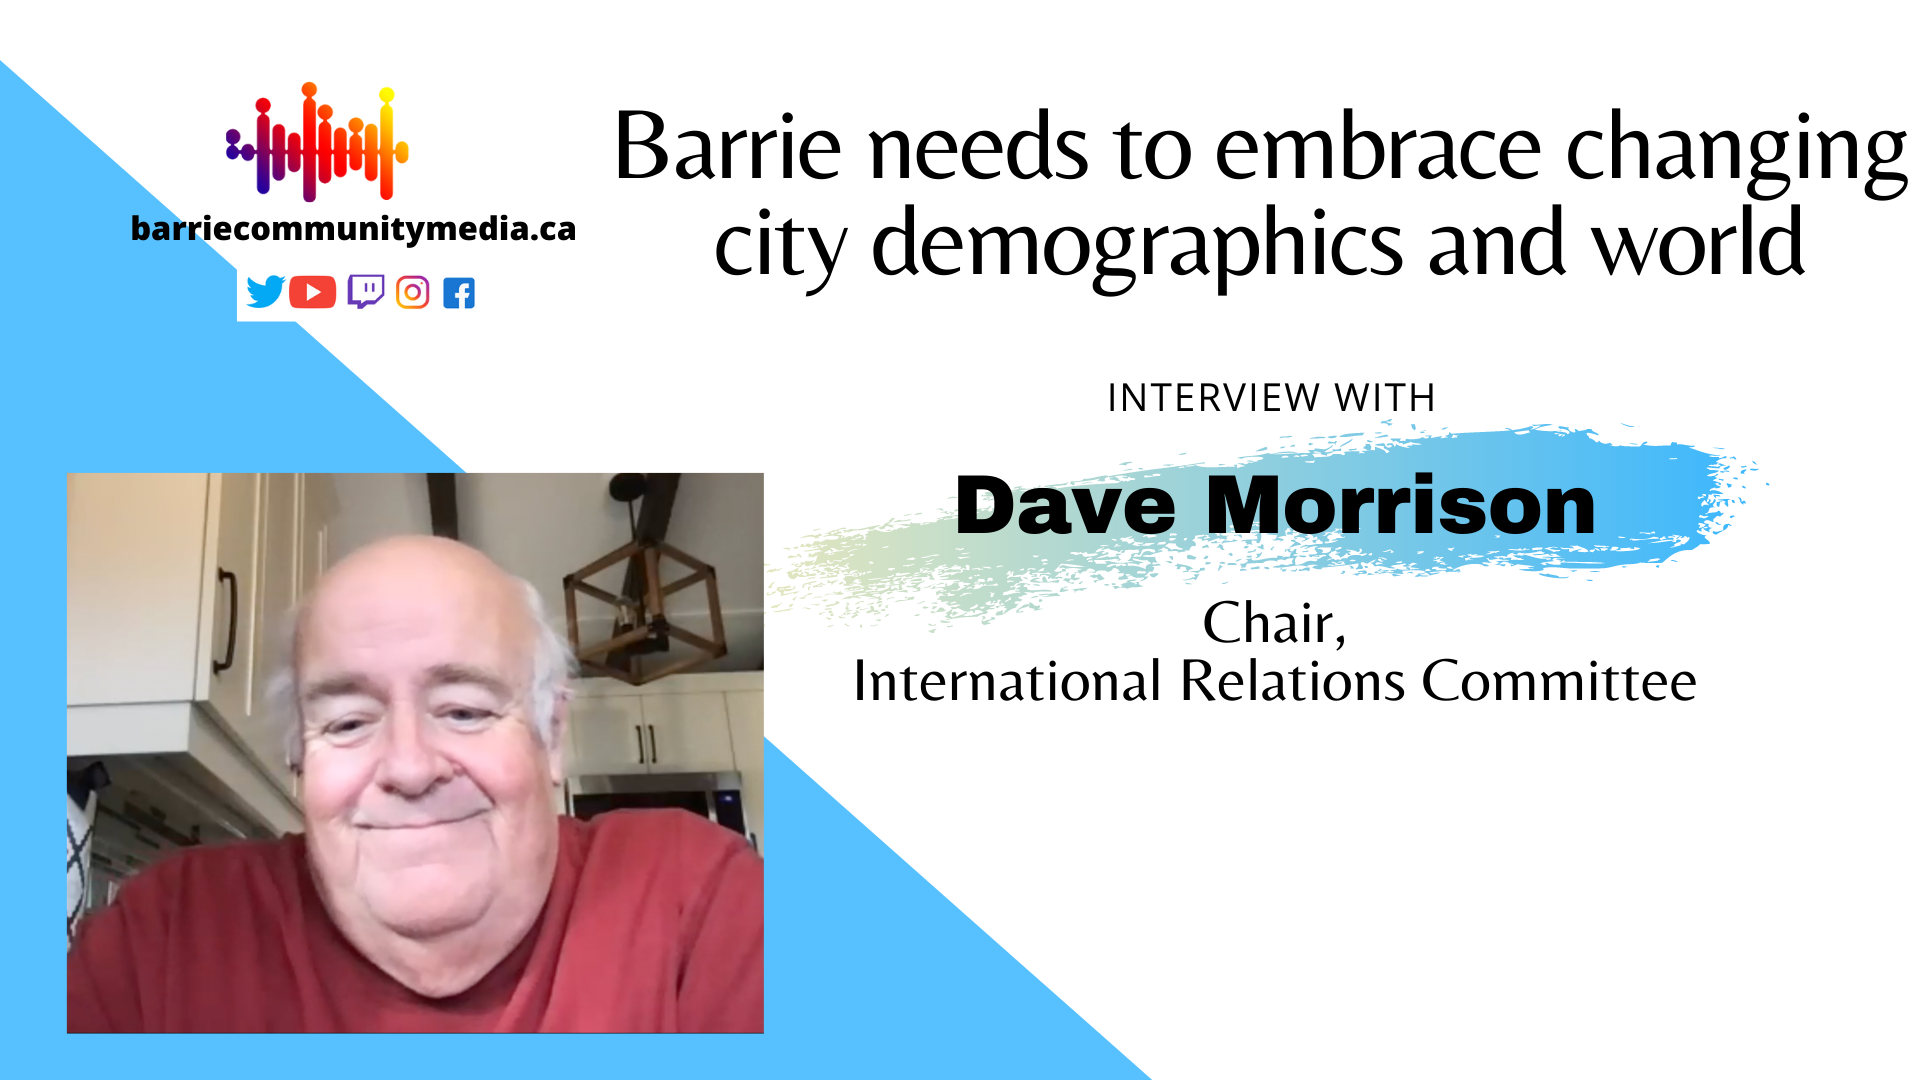 Barrie needs to embrace changing city demographics and world